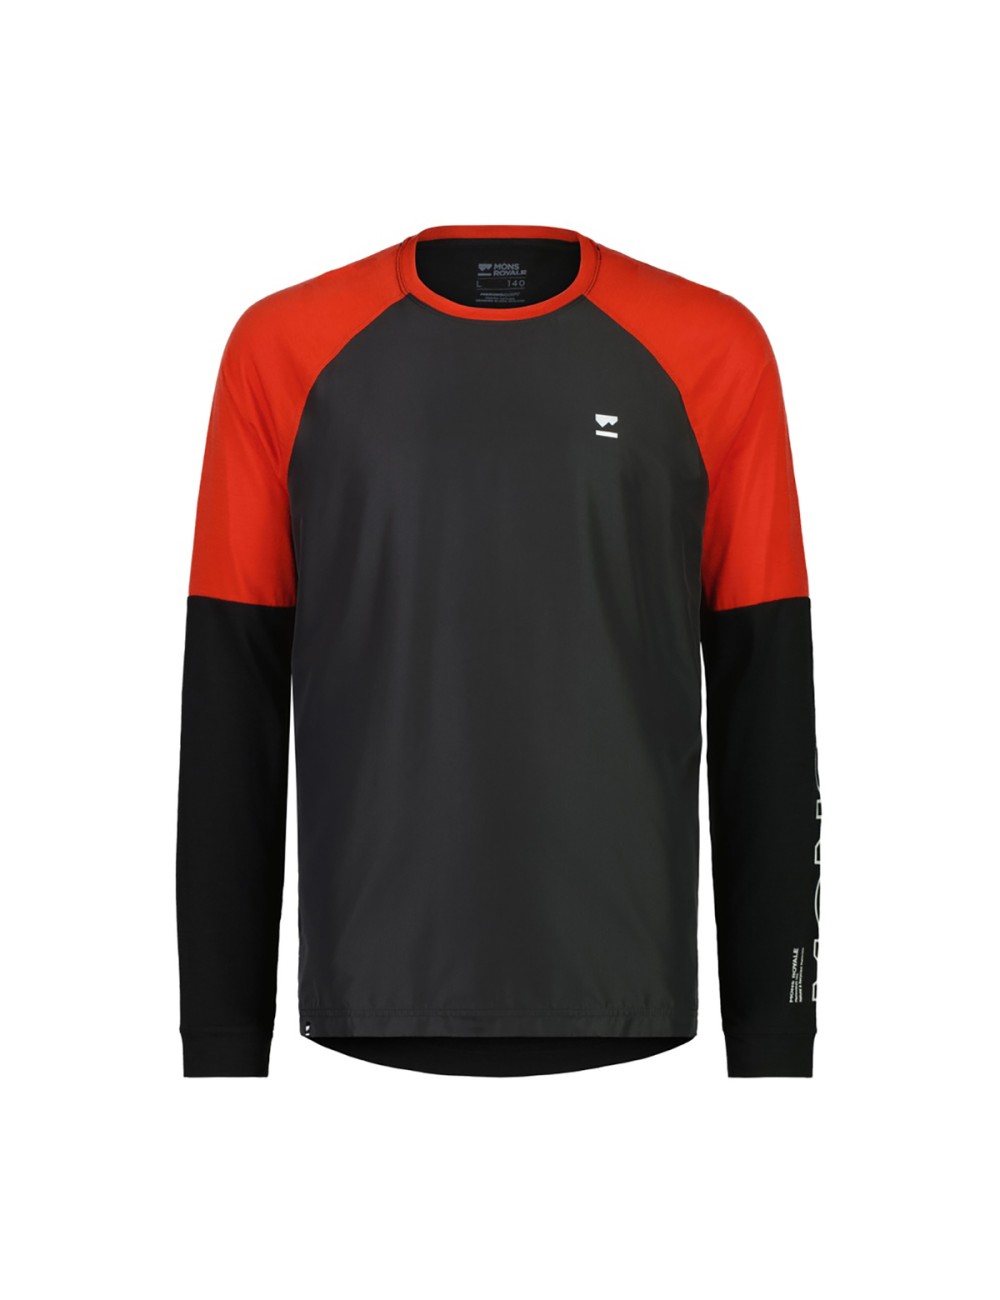 Mons Royale Tarn Shift Wind Jersey - Retro Red